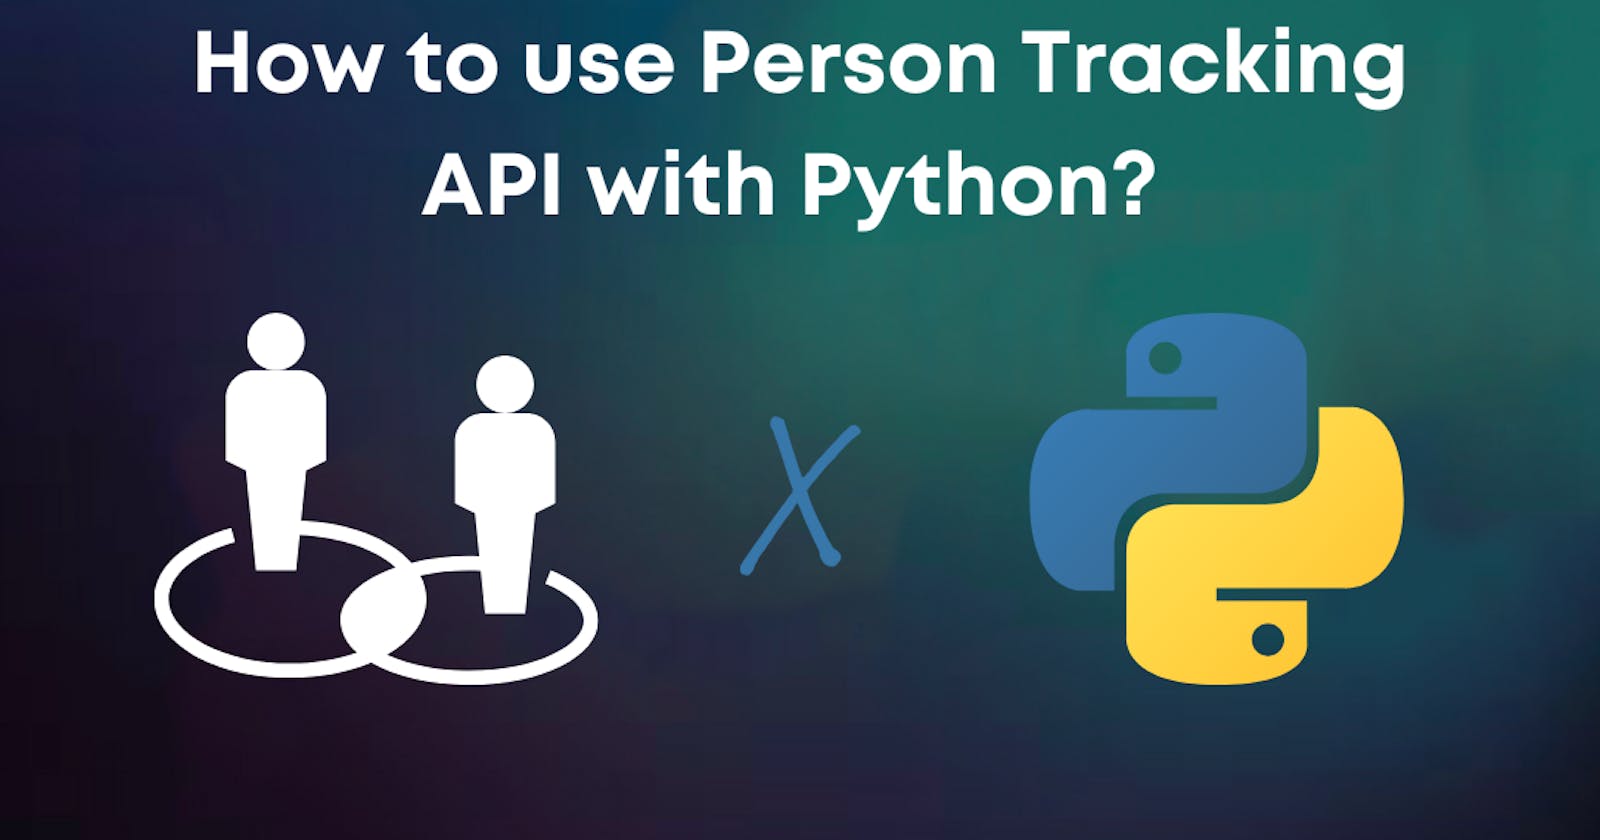 How to use Video Person Tracking API with Python in 5 minutes?